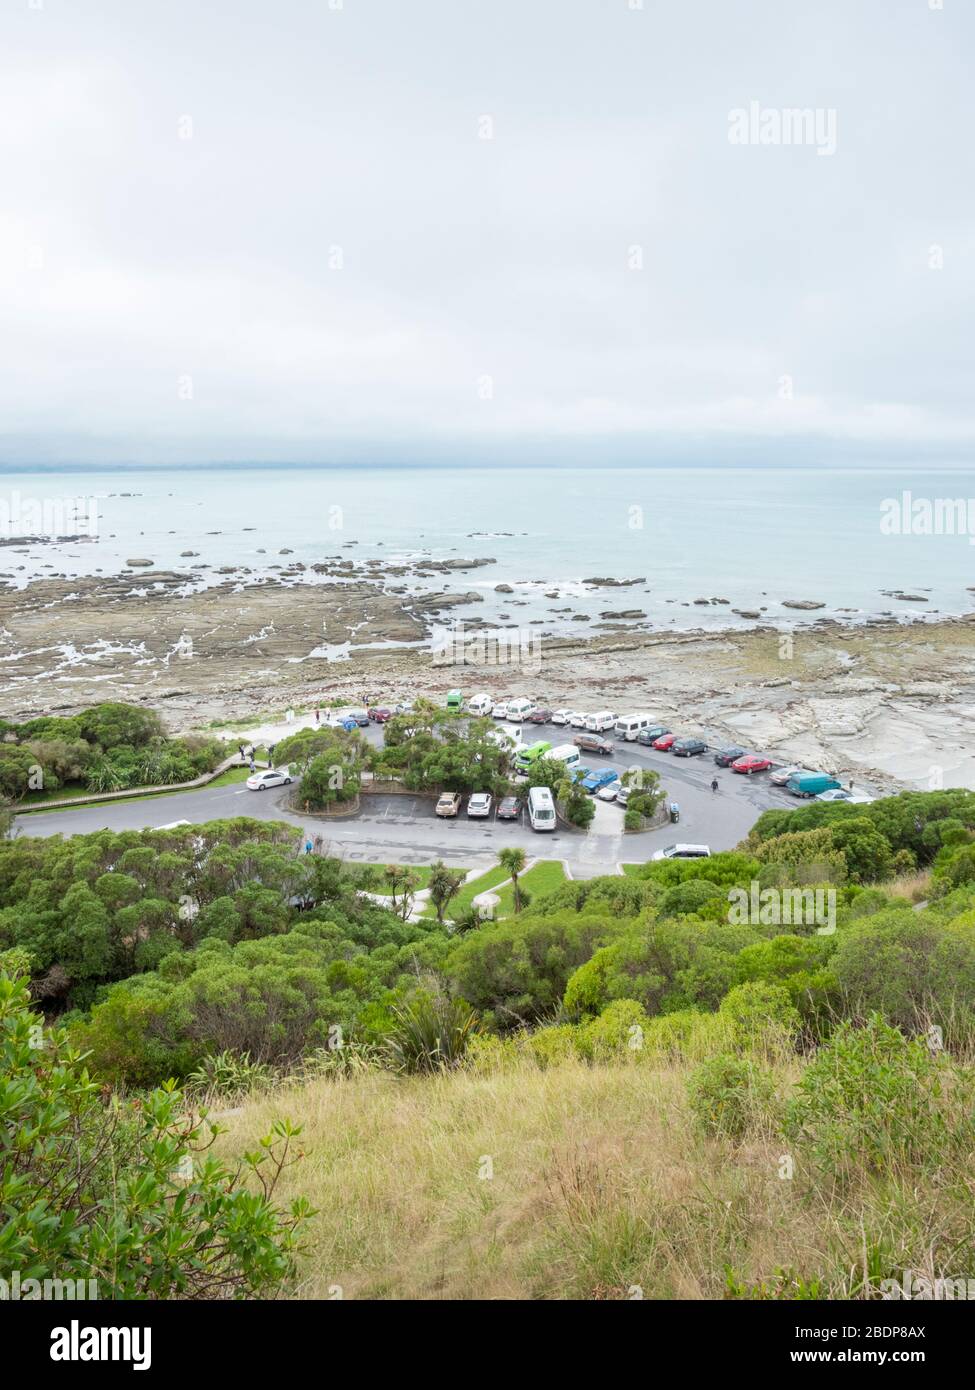 The rocky shore and coastline and landscape  at Point Kean Kaikoura New Zealand on a grey day with a view of the car park area. Stock Photo